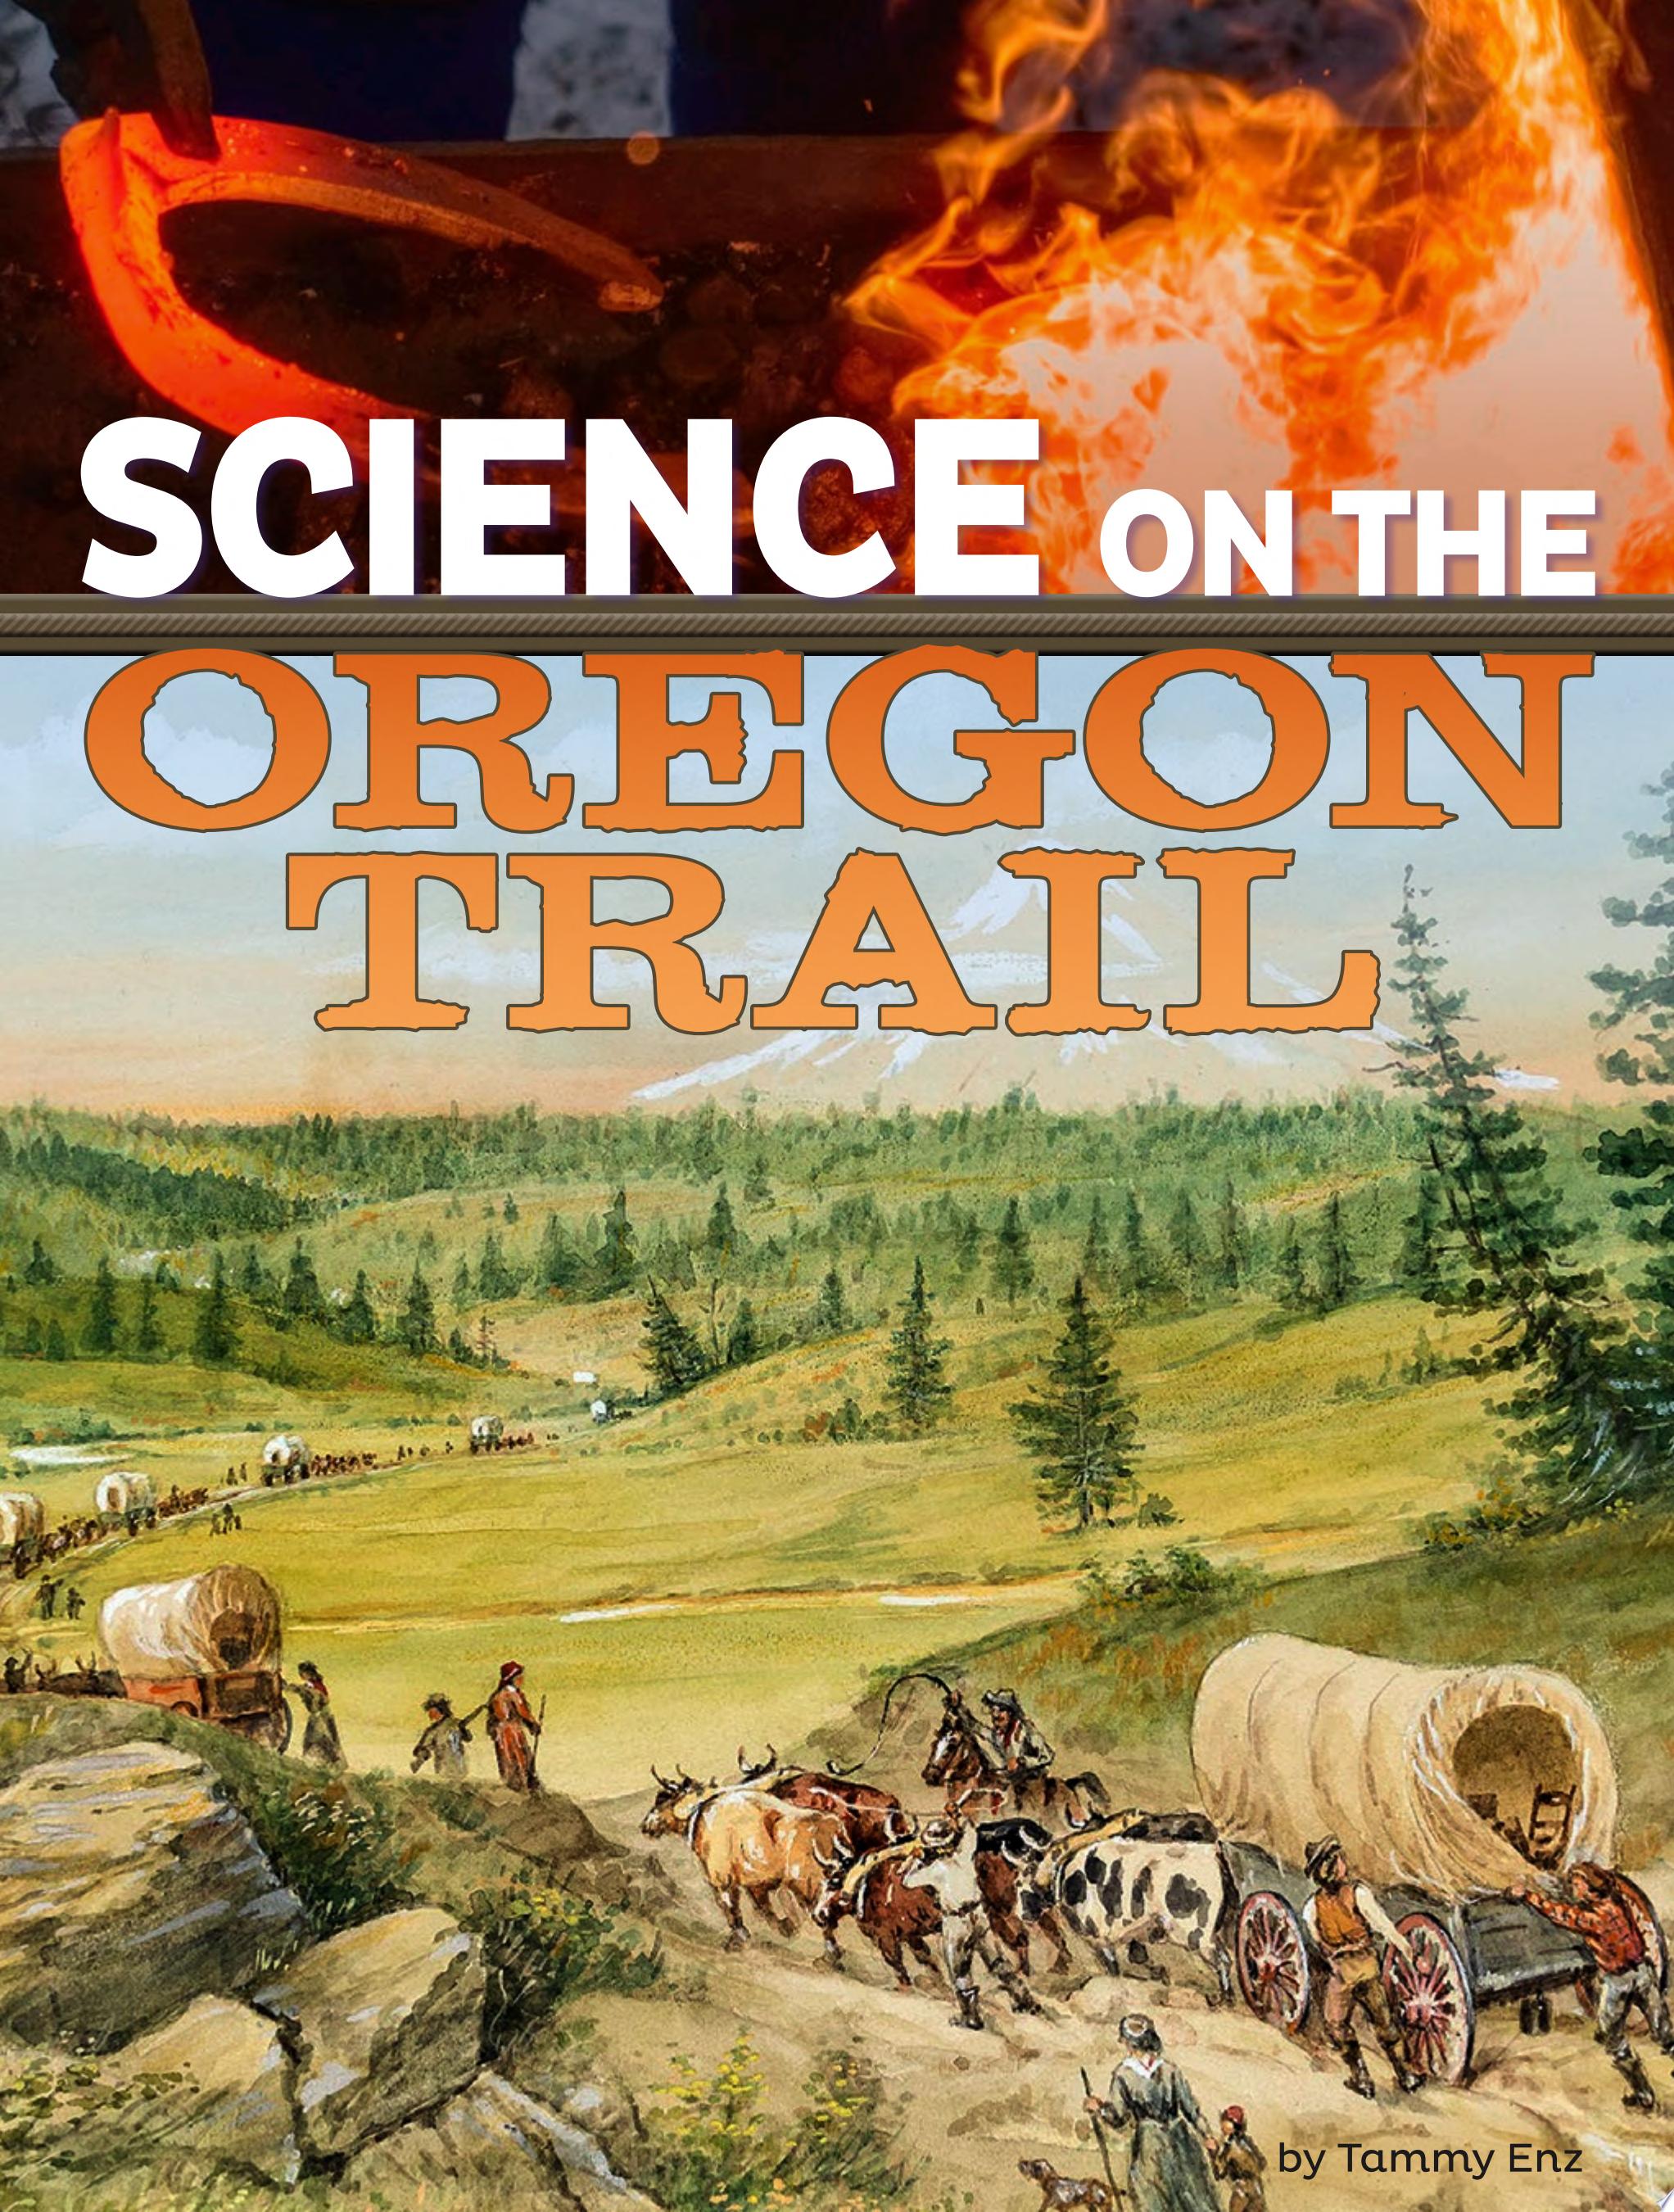 Image for "Science on the Oregon Trail"